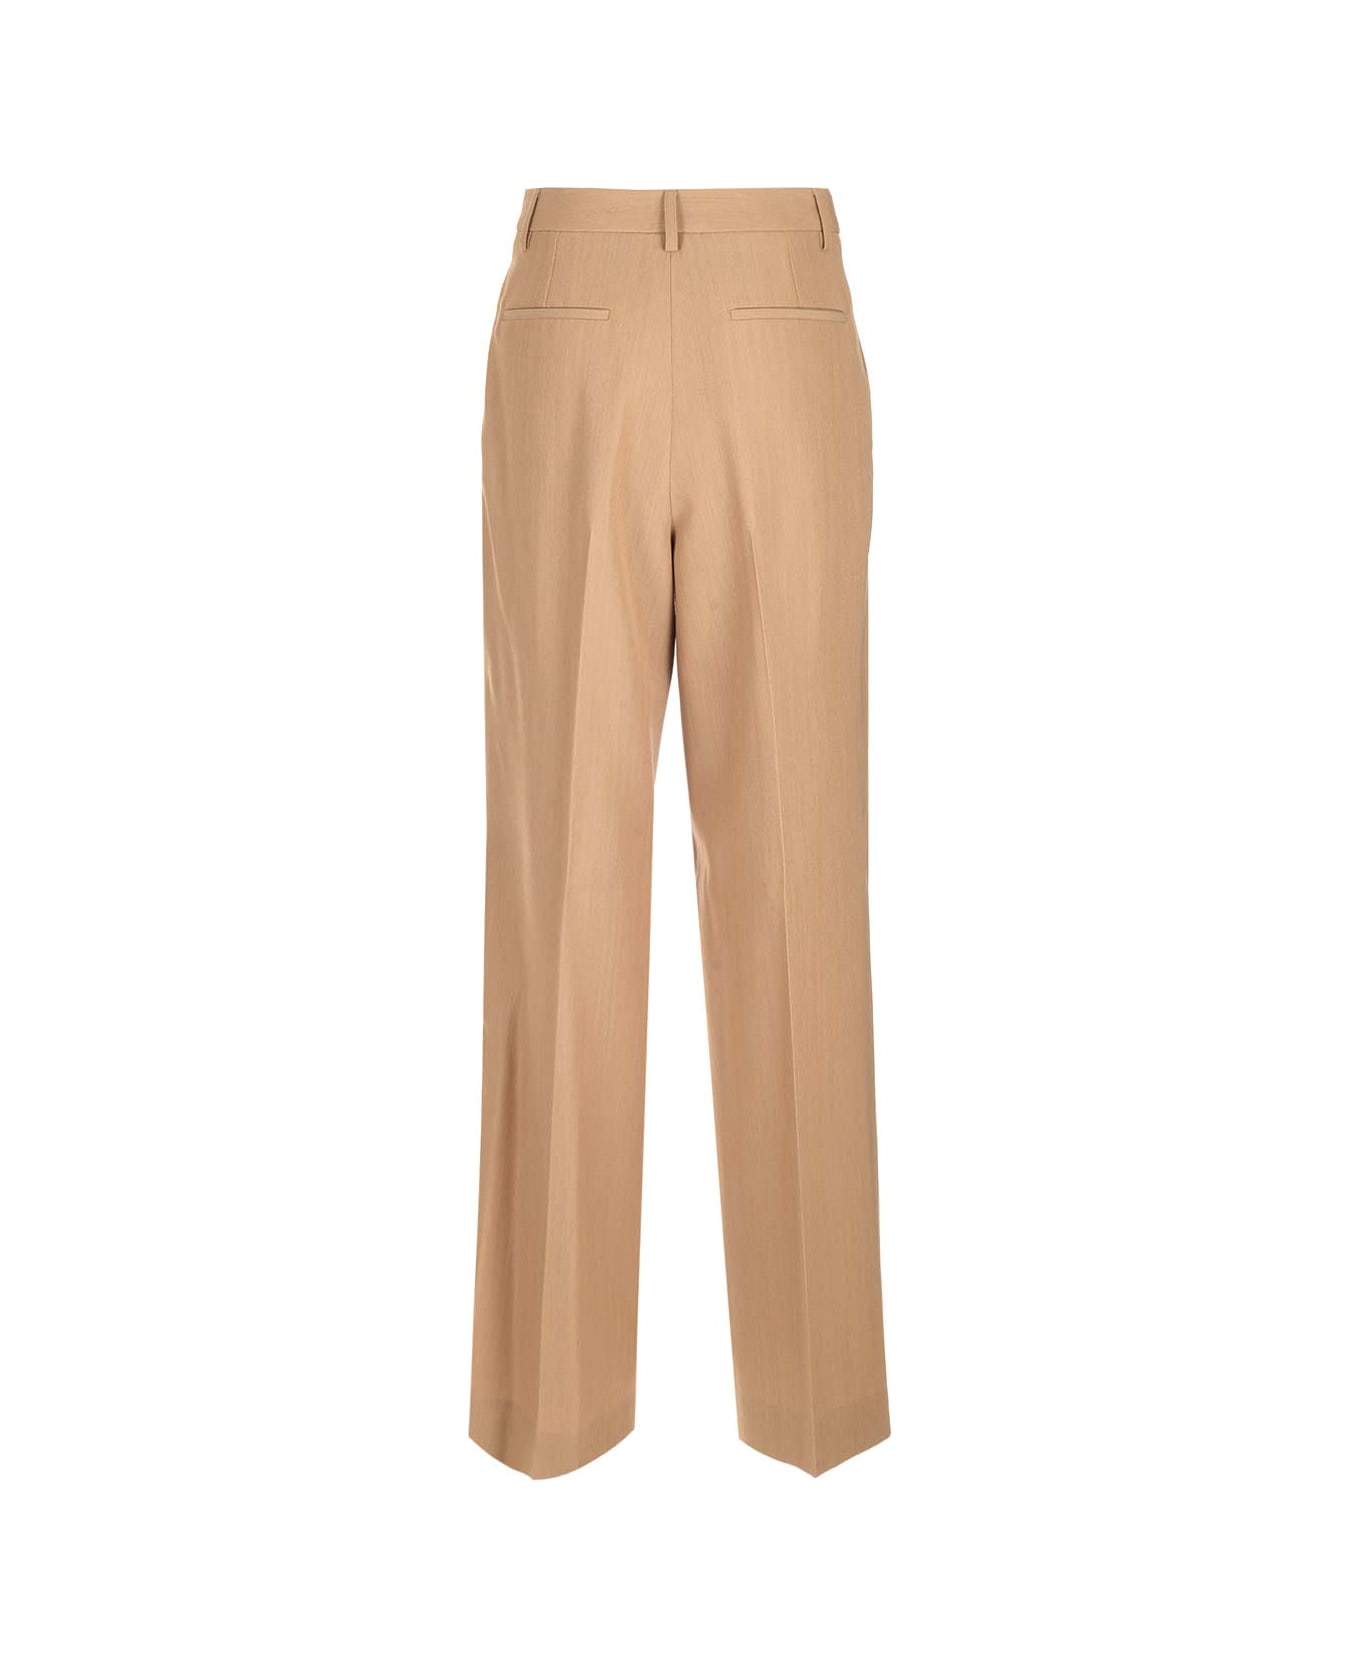 Burberry 'madge' Wide-leg Trousers - Beige ボトムス